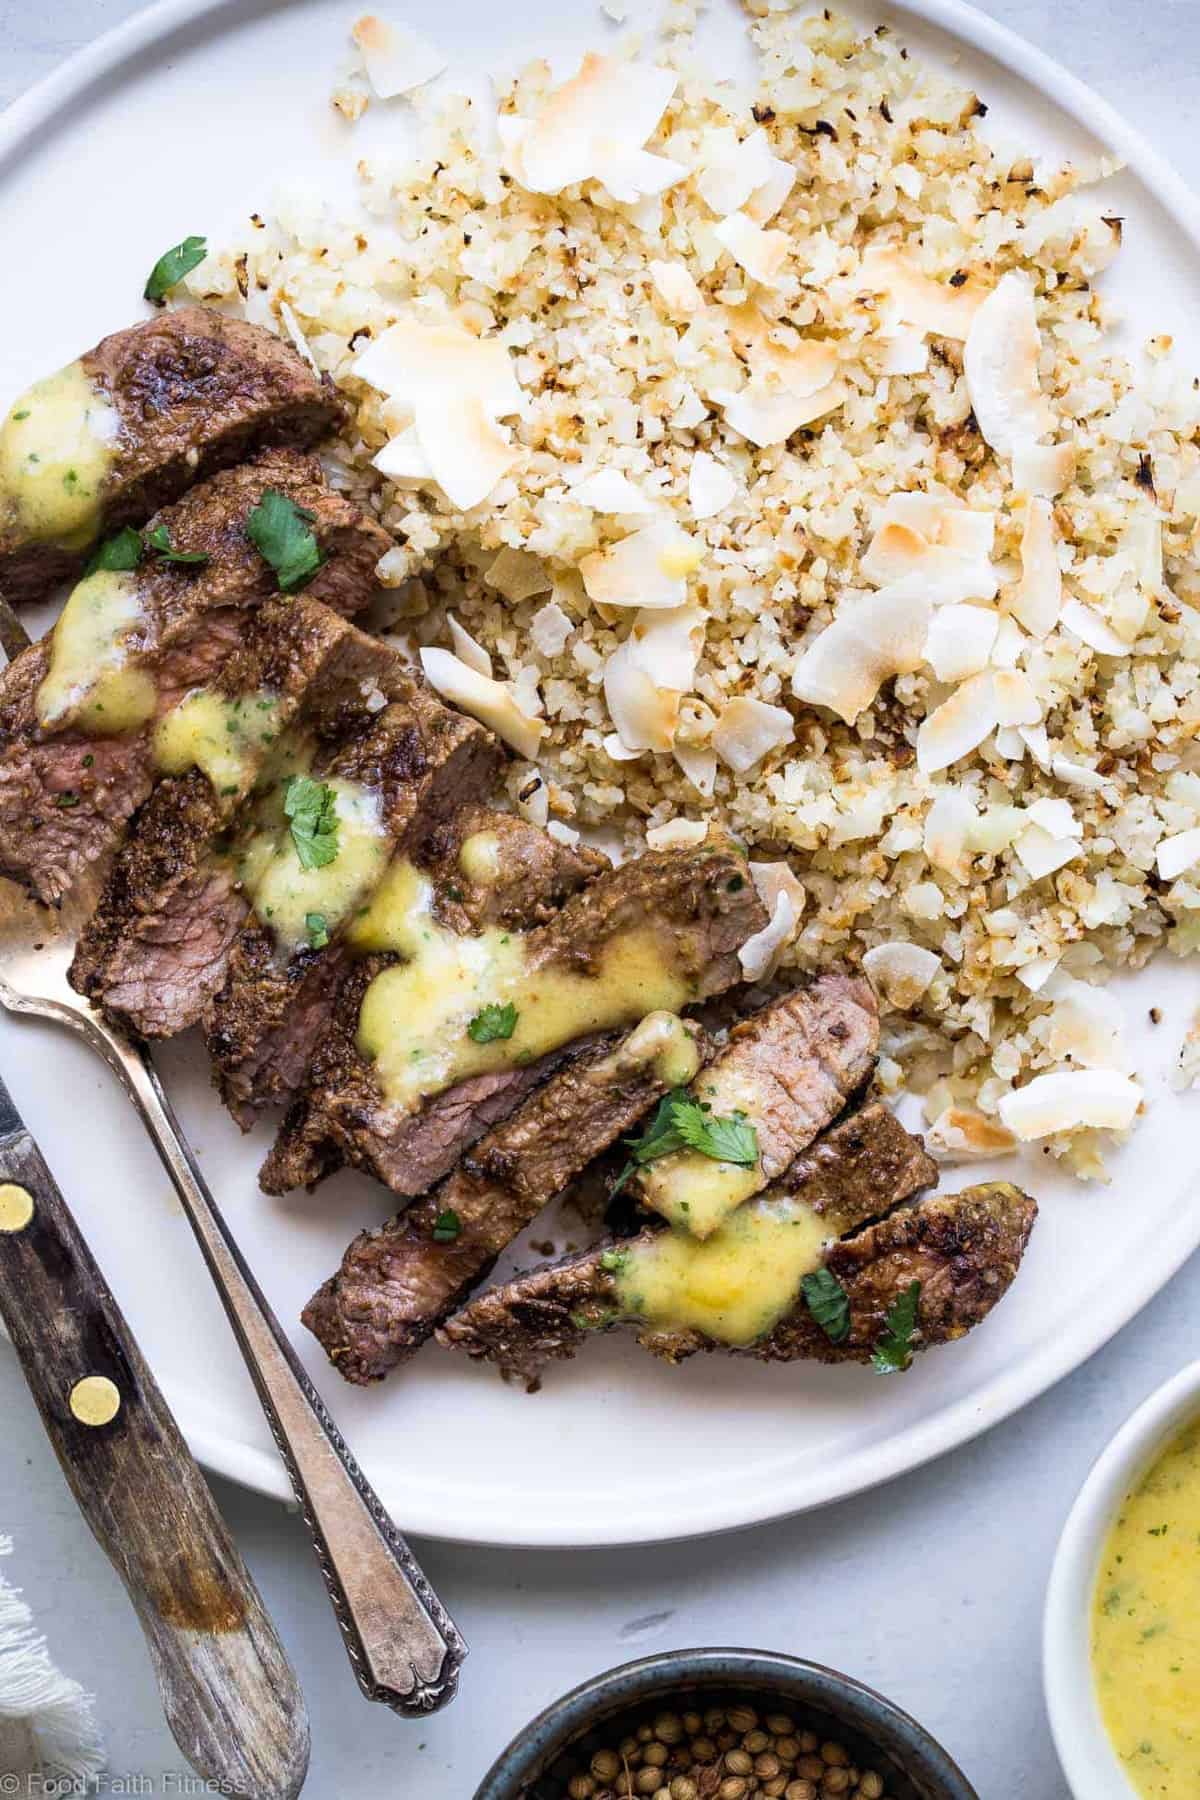 Mango Curry Steak with Coconut Cauliflower Rice - This mango curry steak is served with coconut cauliflower rice for an easy, weeknight dinner that is  under 400 calories, lower carb, gluten free and has bold, addicting flavor! | #Foodfaithfitness | #Glutenfree #Lowcarb #Healthy #Sugarfree #grainfree